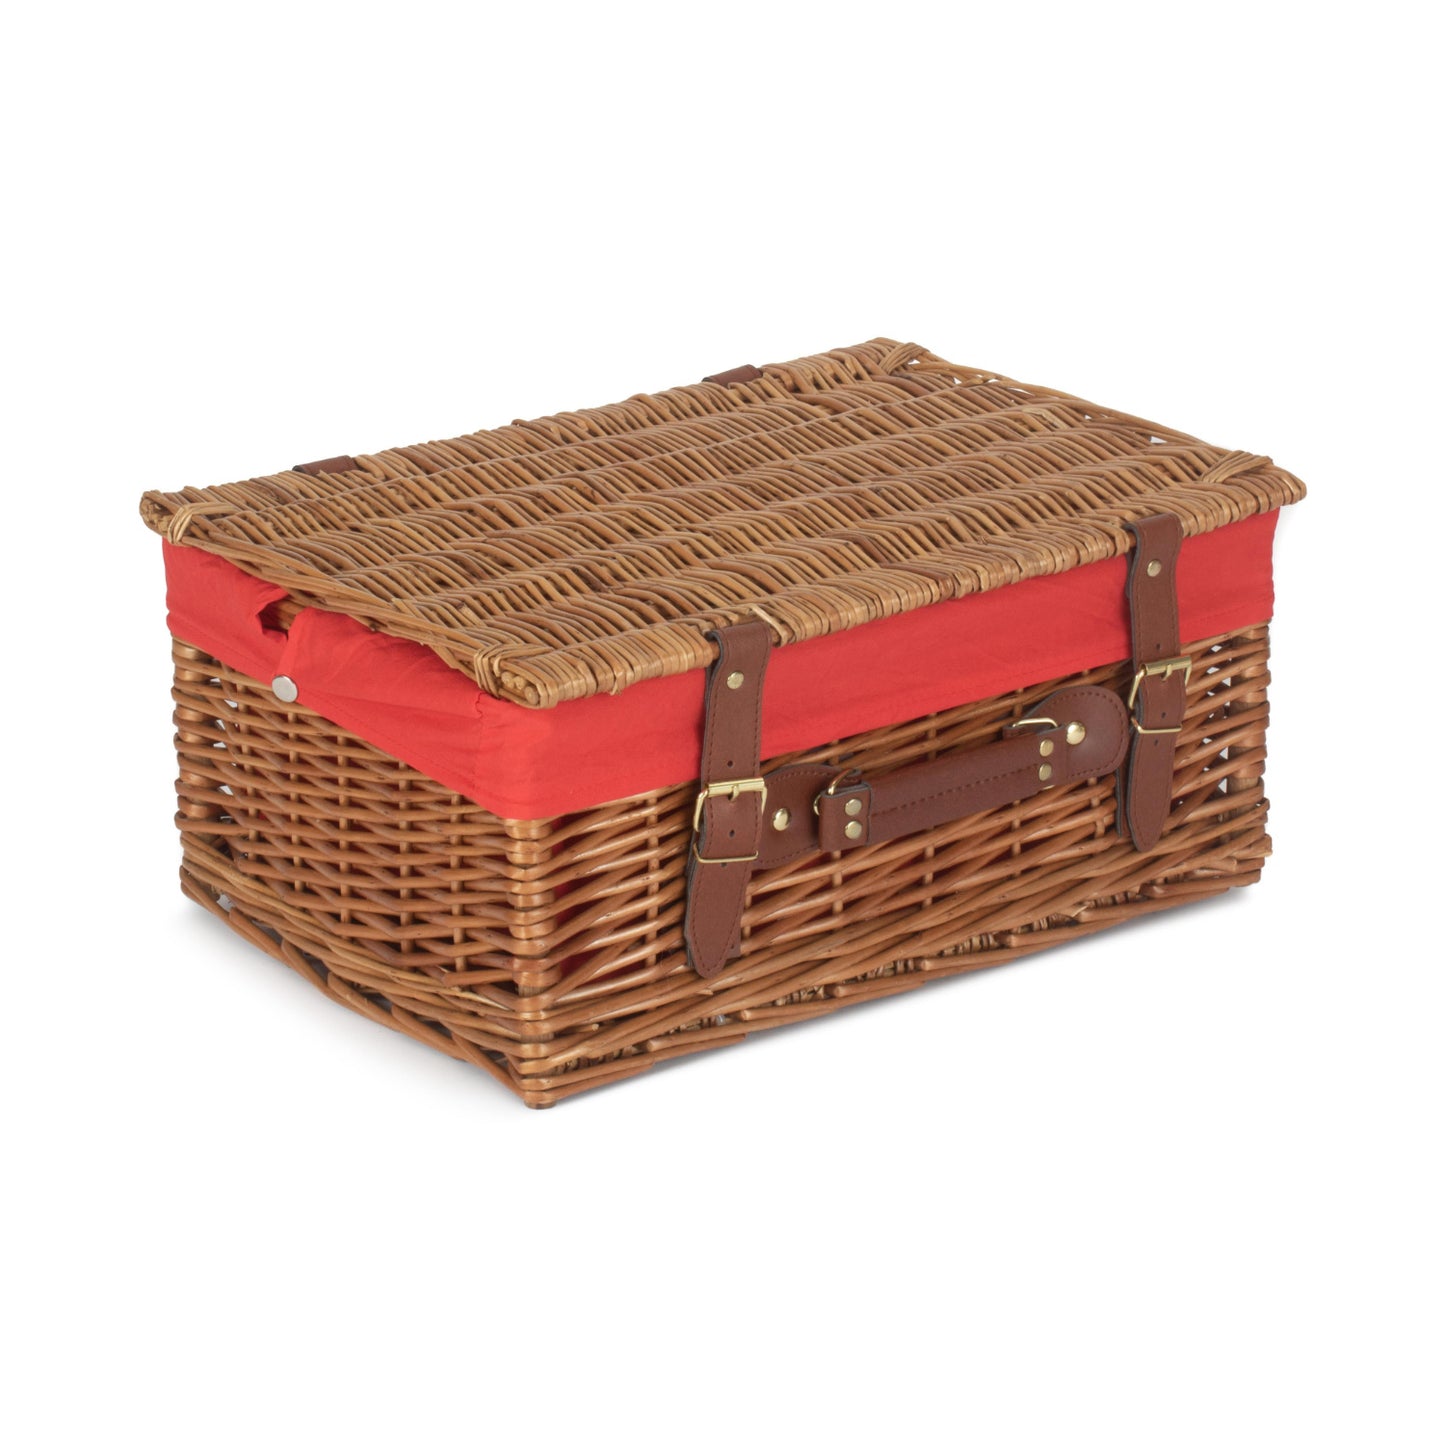 16 Inch Light Steamed Hamper With Red Lining